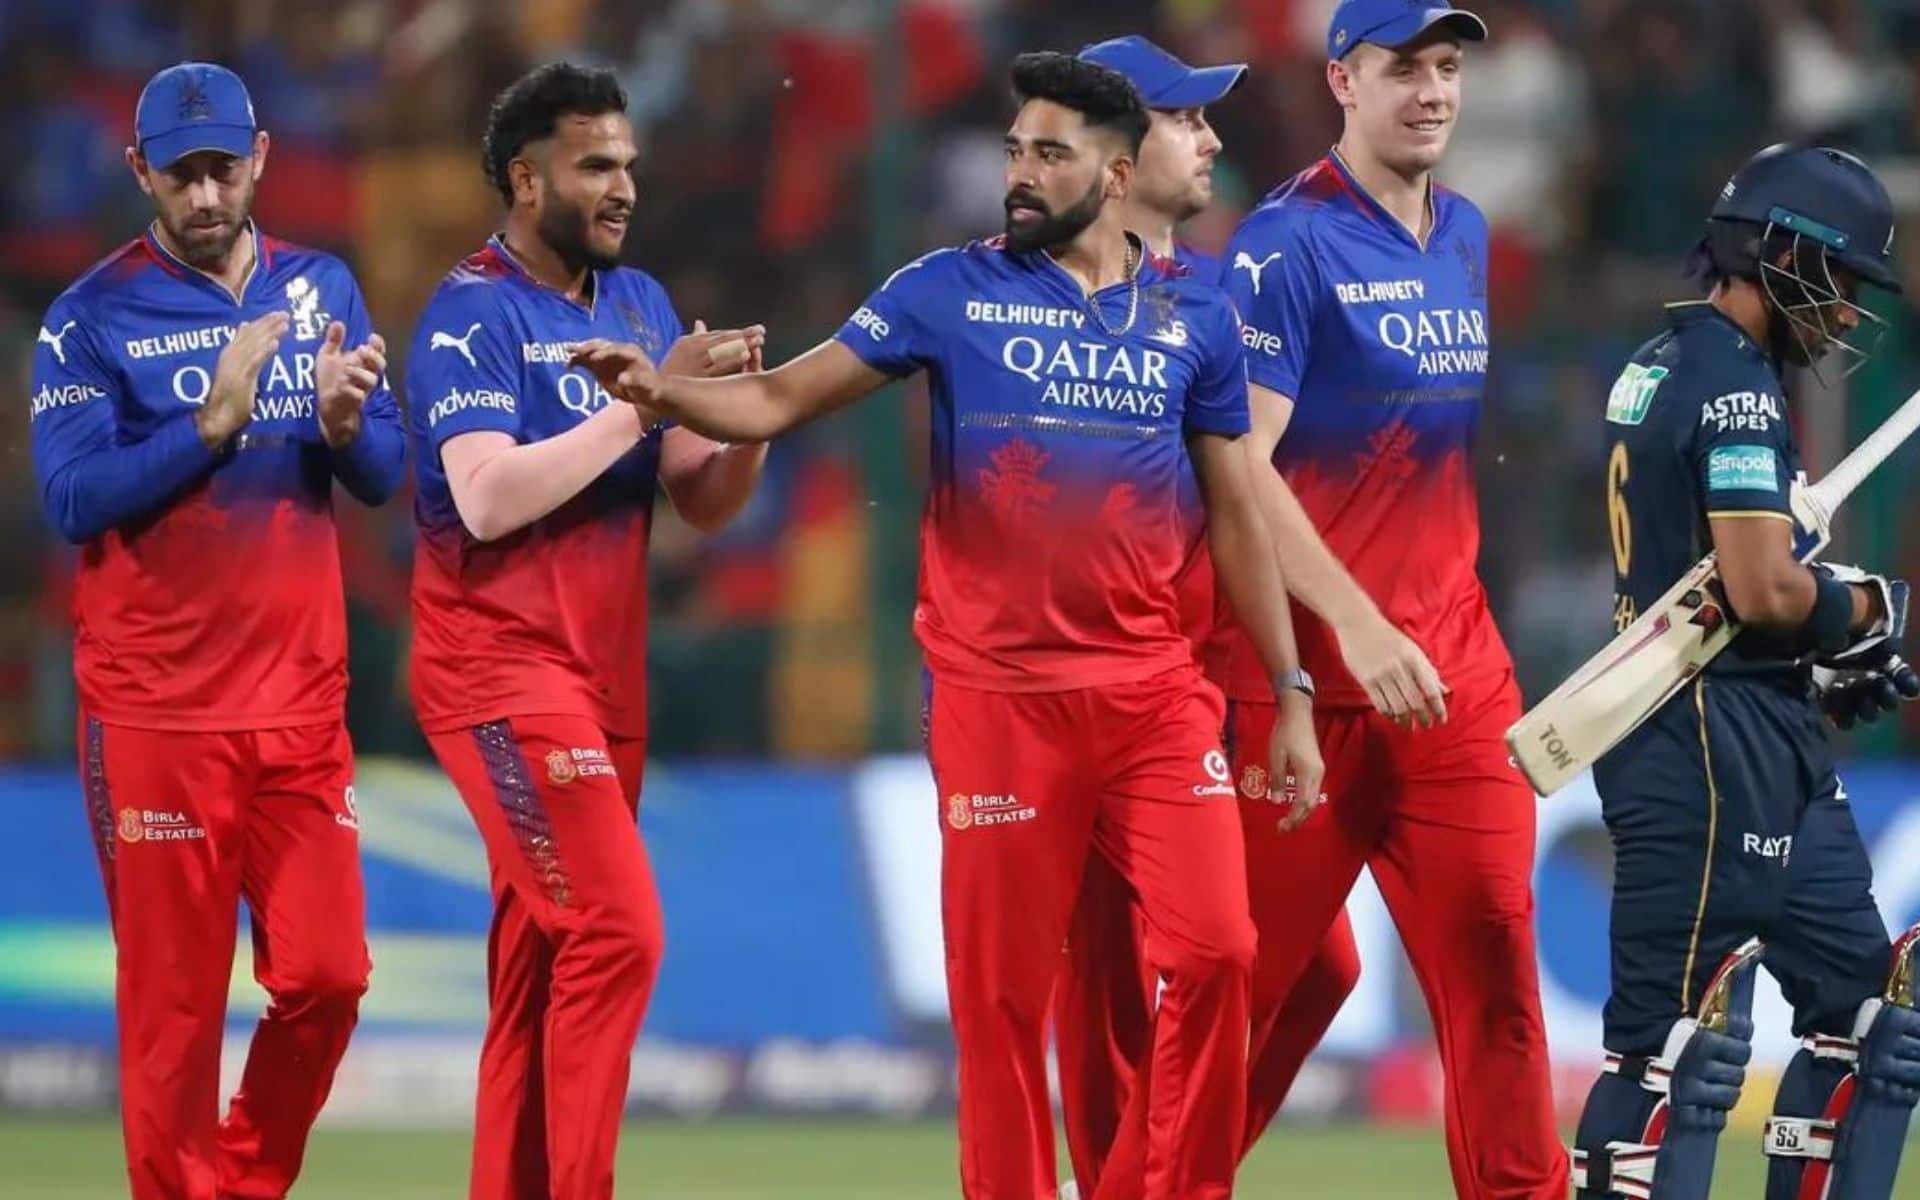 RCB won the match against GT by 4 wickets (AP)